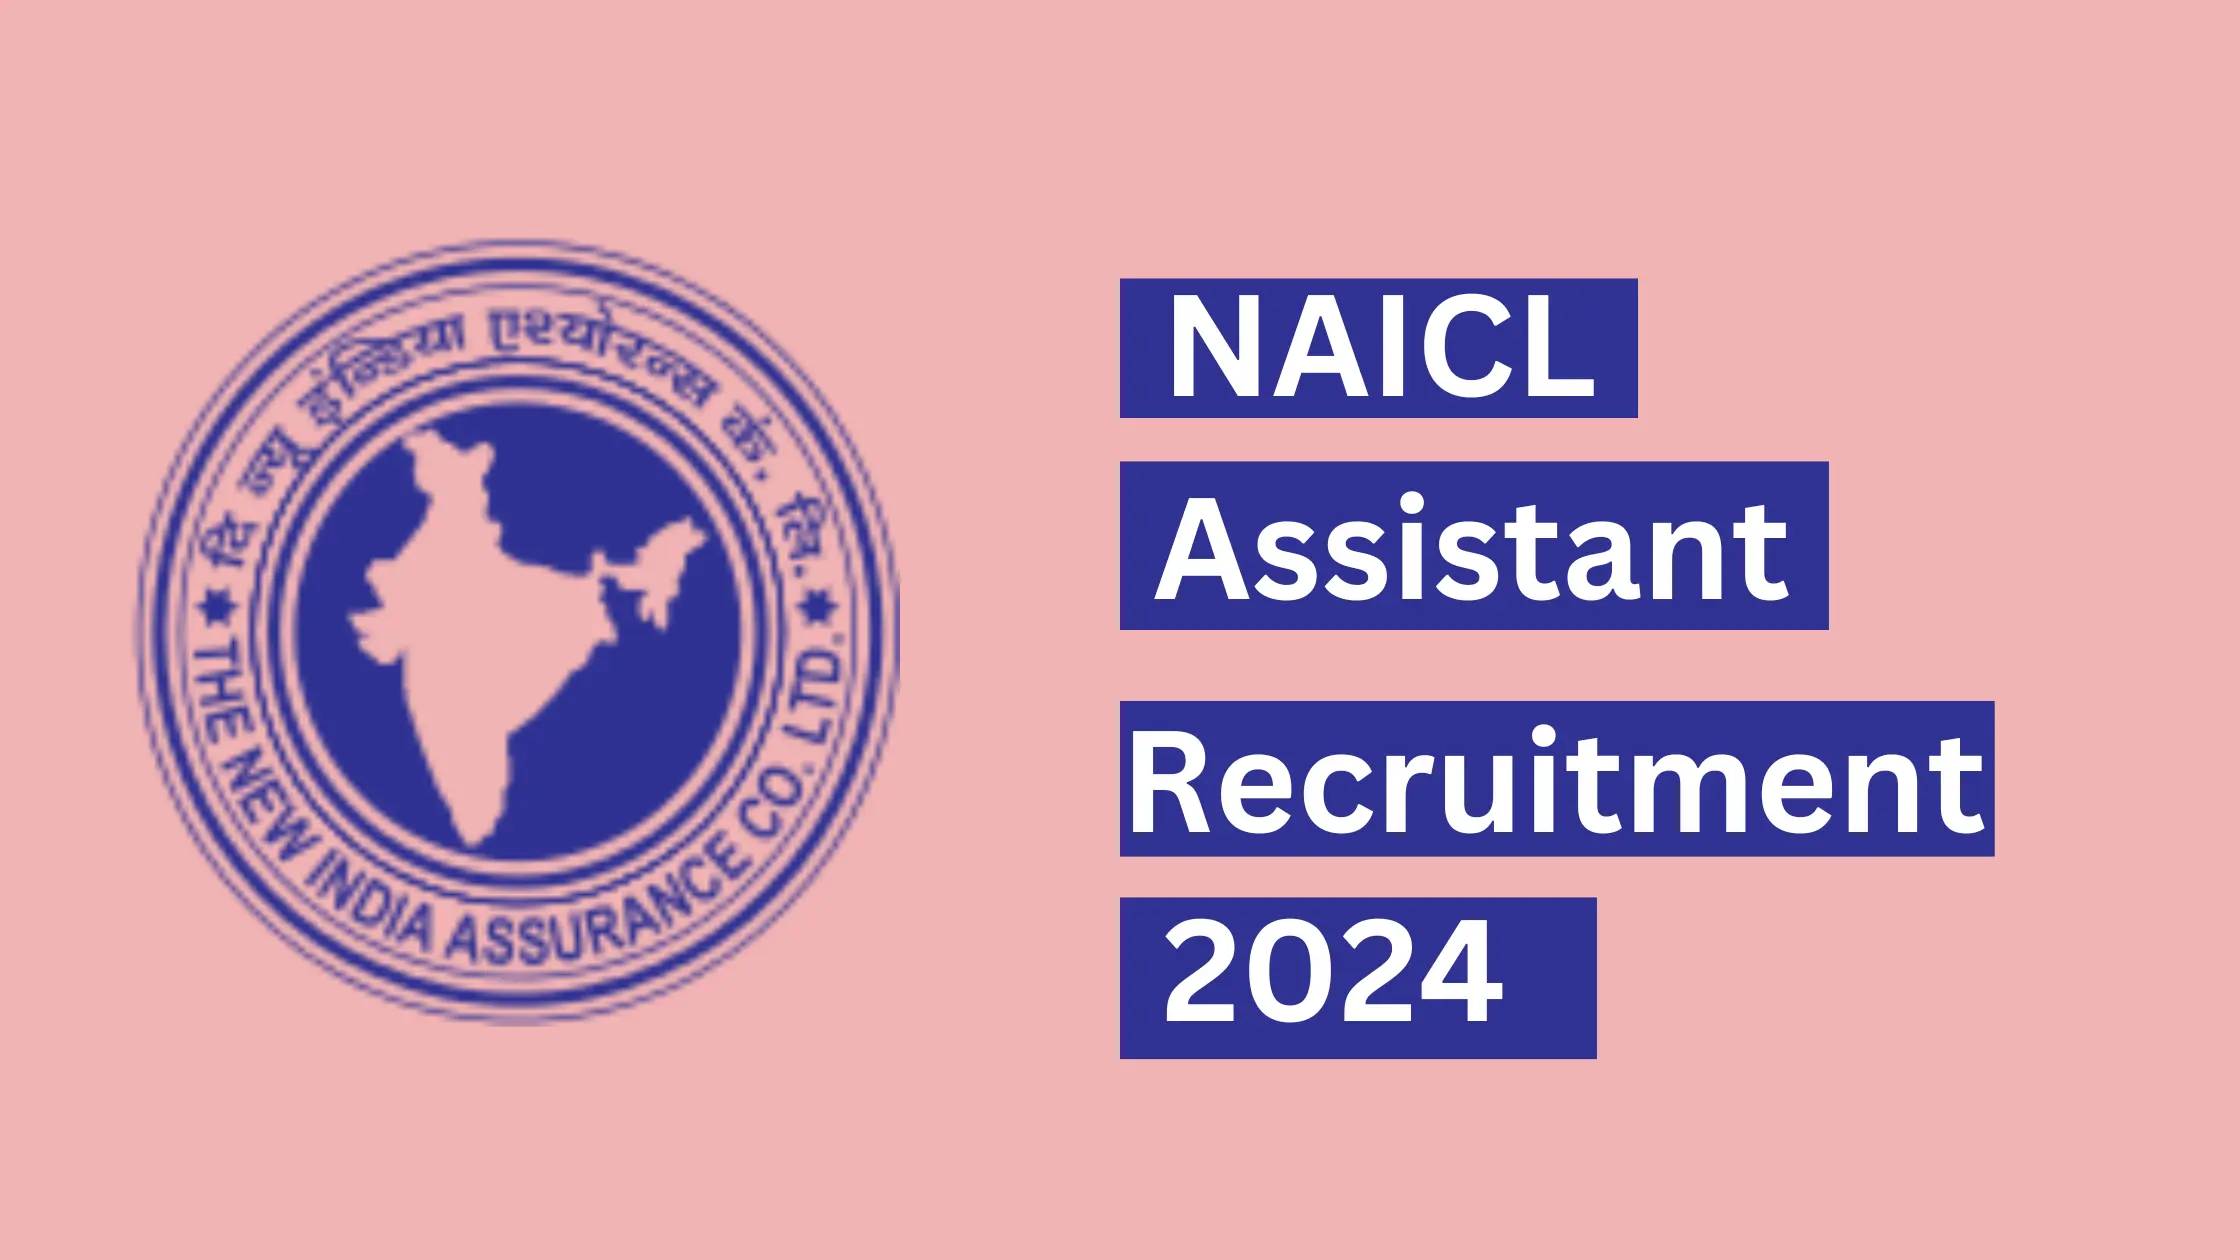 NAICL Assistant Recruitment 2024